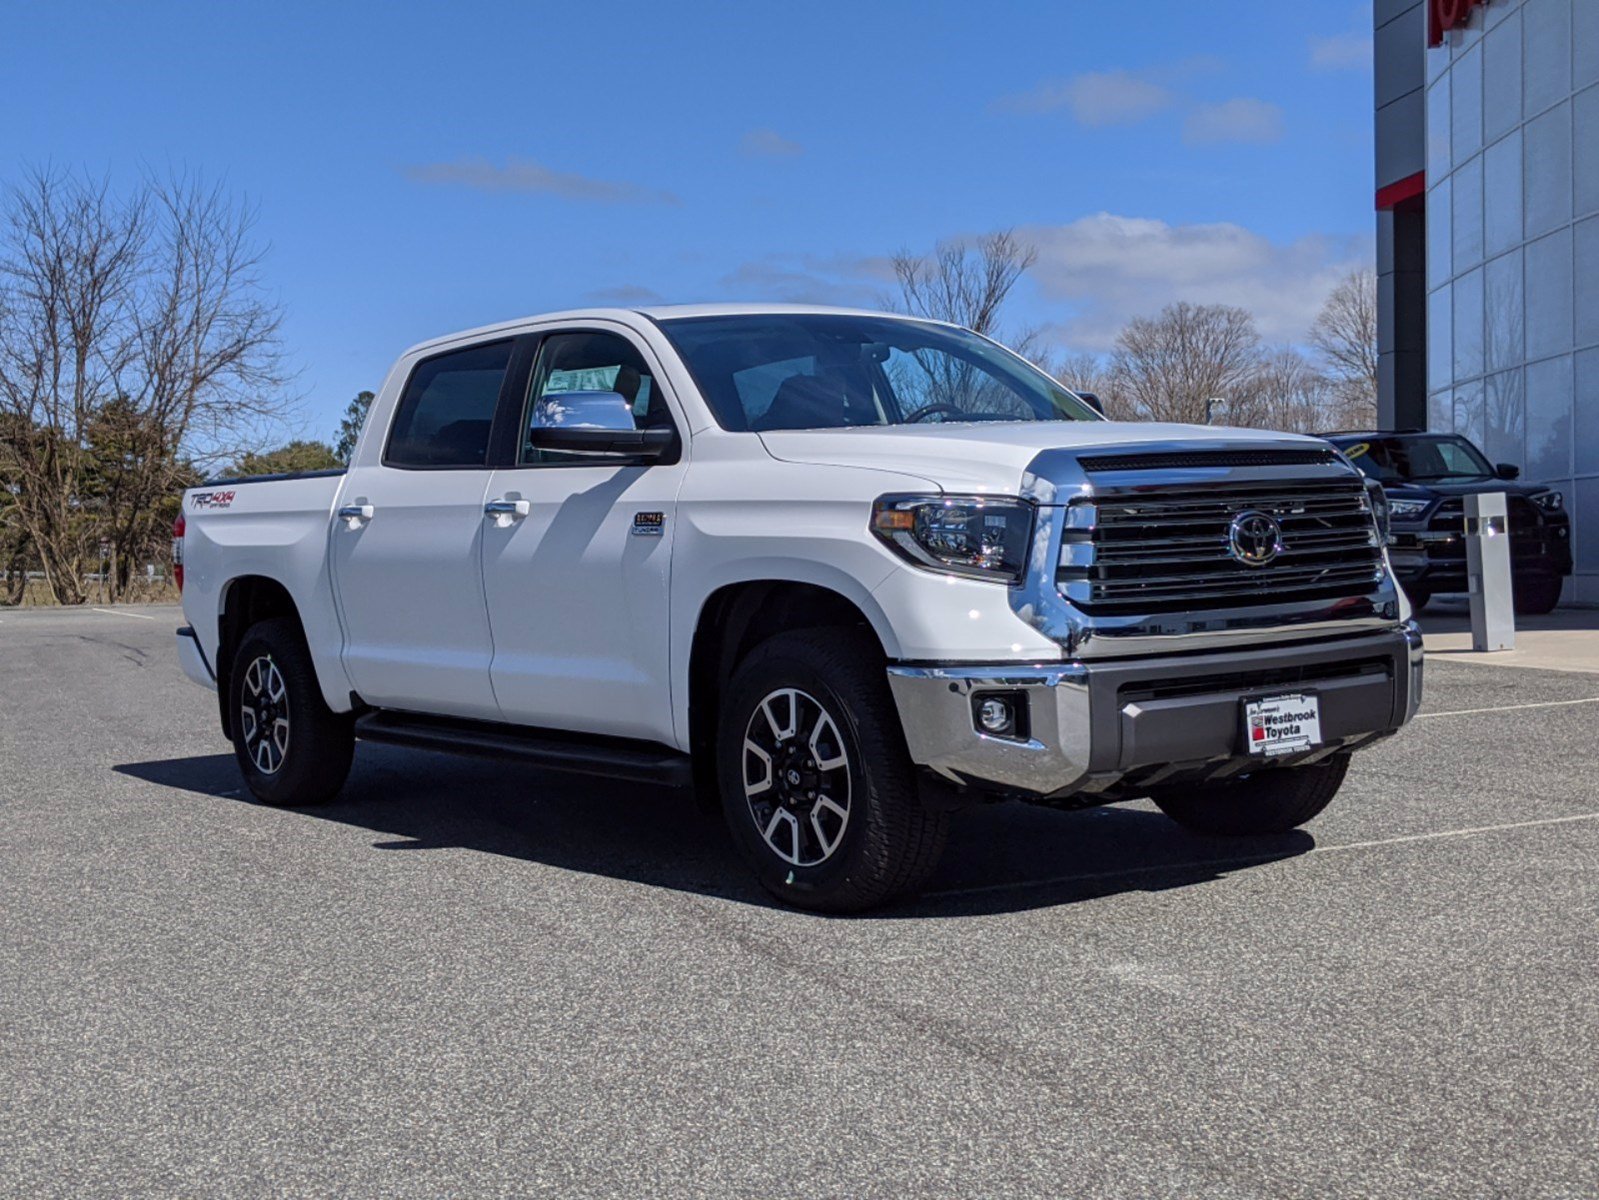 New 2020 Toyota Tundra 1794 Edition CrewMax in Westbrook #20278